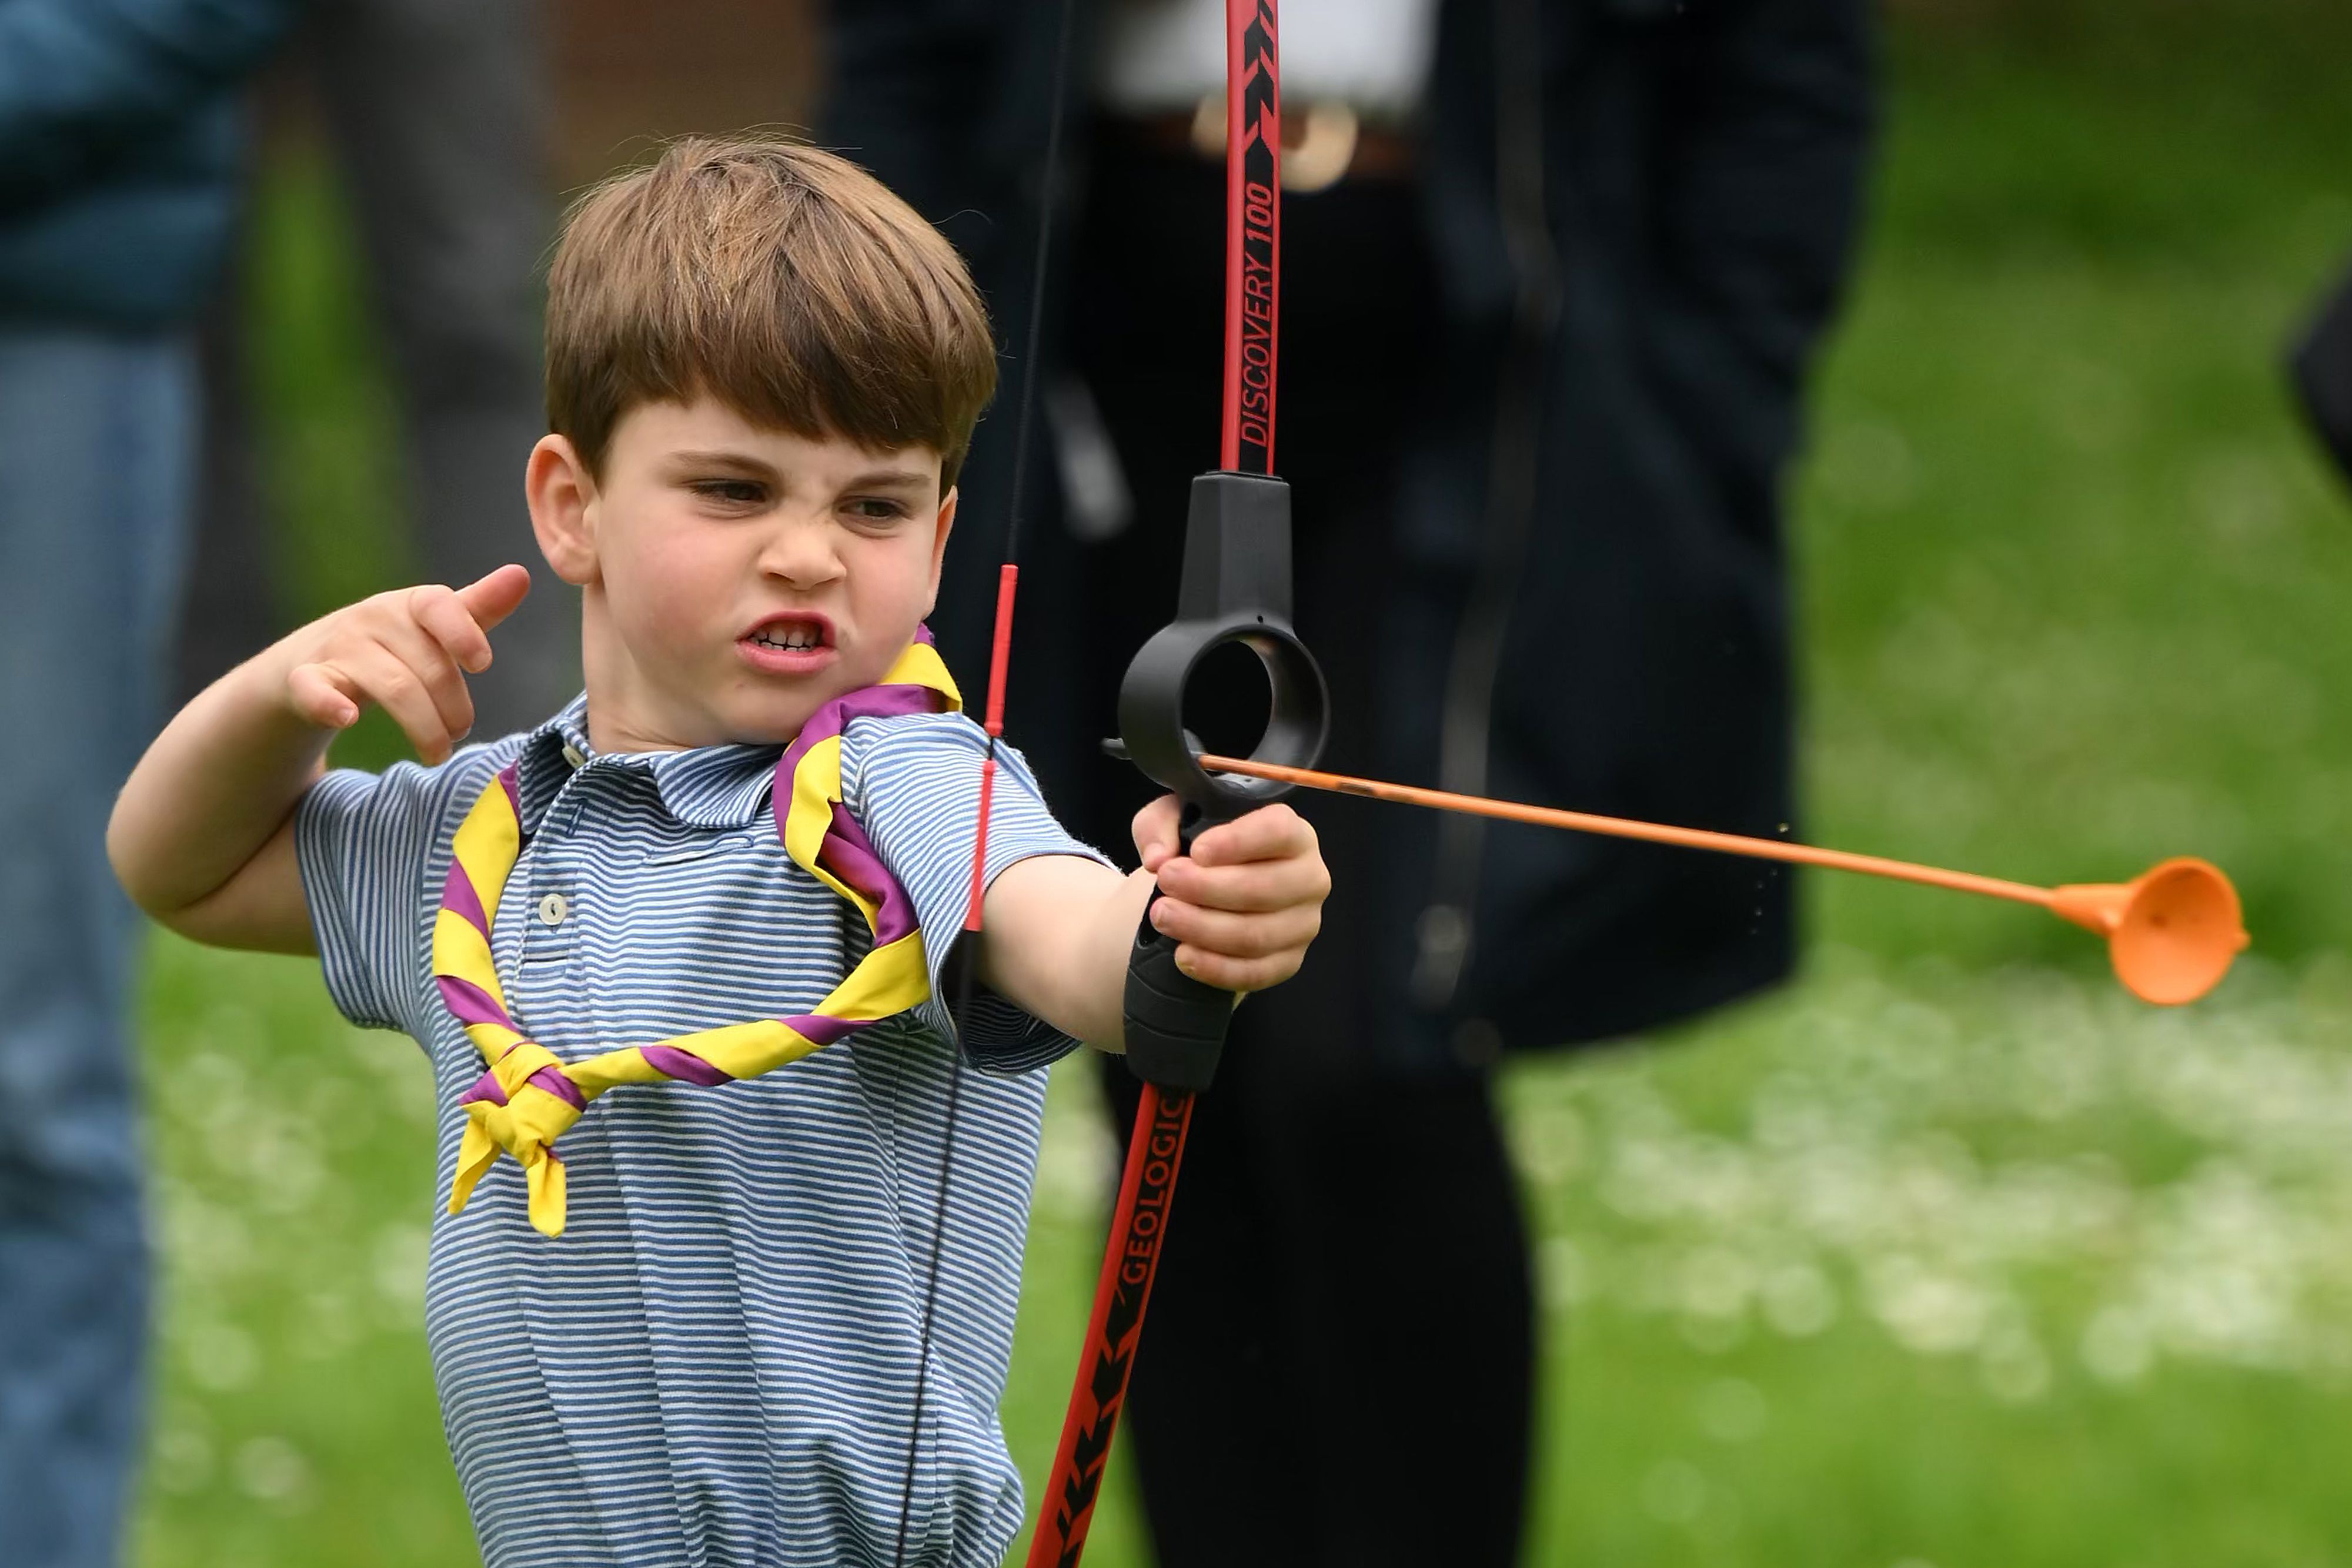 <p>Prince Louis tried his hand at archery while taking part in the Big Help Out volunteering drive -- the final event of grandfather King Charles III's <a href="https://www.wonderwall.com/celebrity/the-coronation-of-king-charles-iii-and-queen-camilla-the-best-pictures-of-all-the-royals-at-this-historic-event-735015.gallery">coronation</a> festivities -- during a visit to the 3rd Upton Scouts Hut in Slough, England, on May 8, 2023, where he and his siblings and parents helped to renovate and improve the building during their visit.</p>